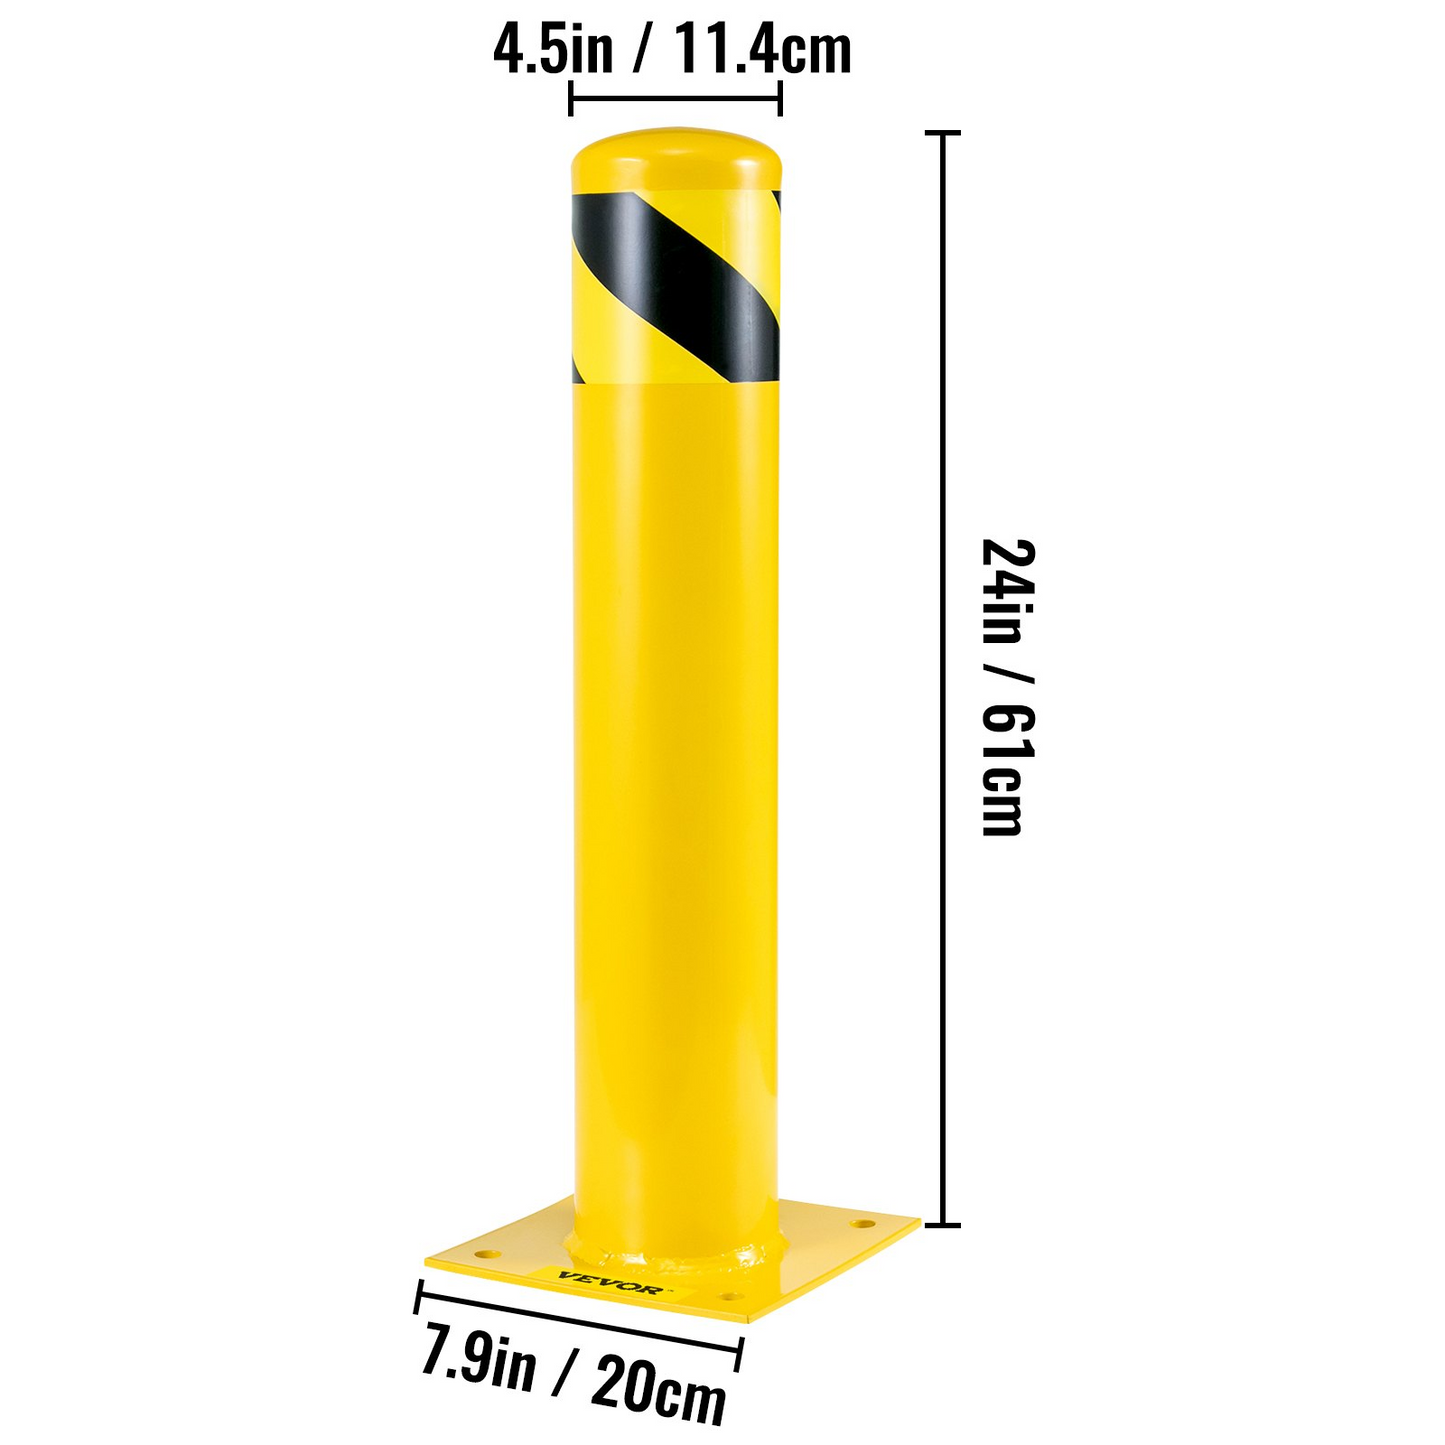 VEVOR Safety Bollard 24"x4.5" Safety Barrier Bollard 4-1/2" OD 24" Height Yellow Powder Coat Pipe Steel Safety Barrier with 4 Free Anchor Bolts for Traffic-Sensitive Area, Goodies N Stuff